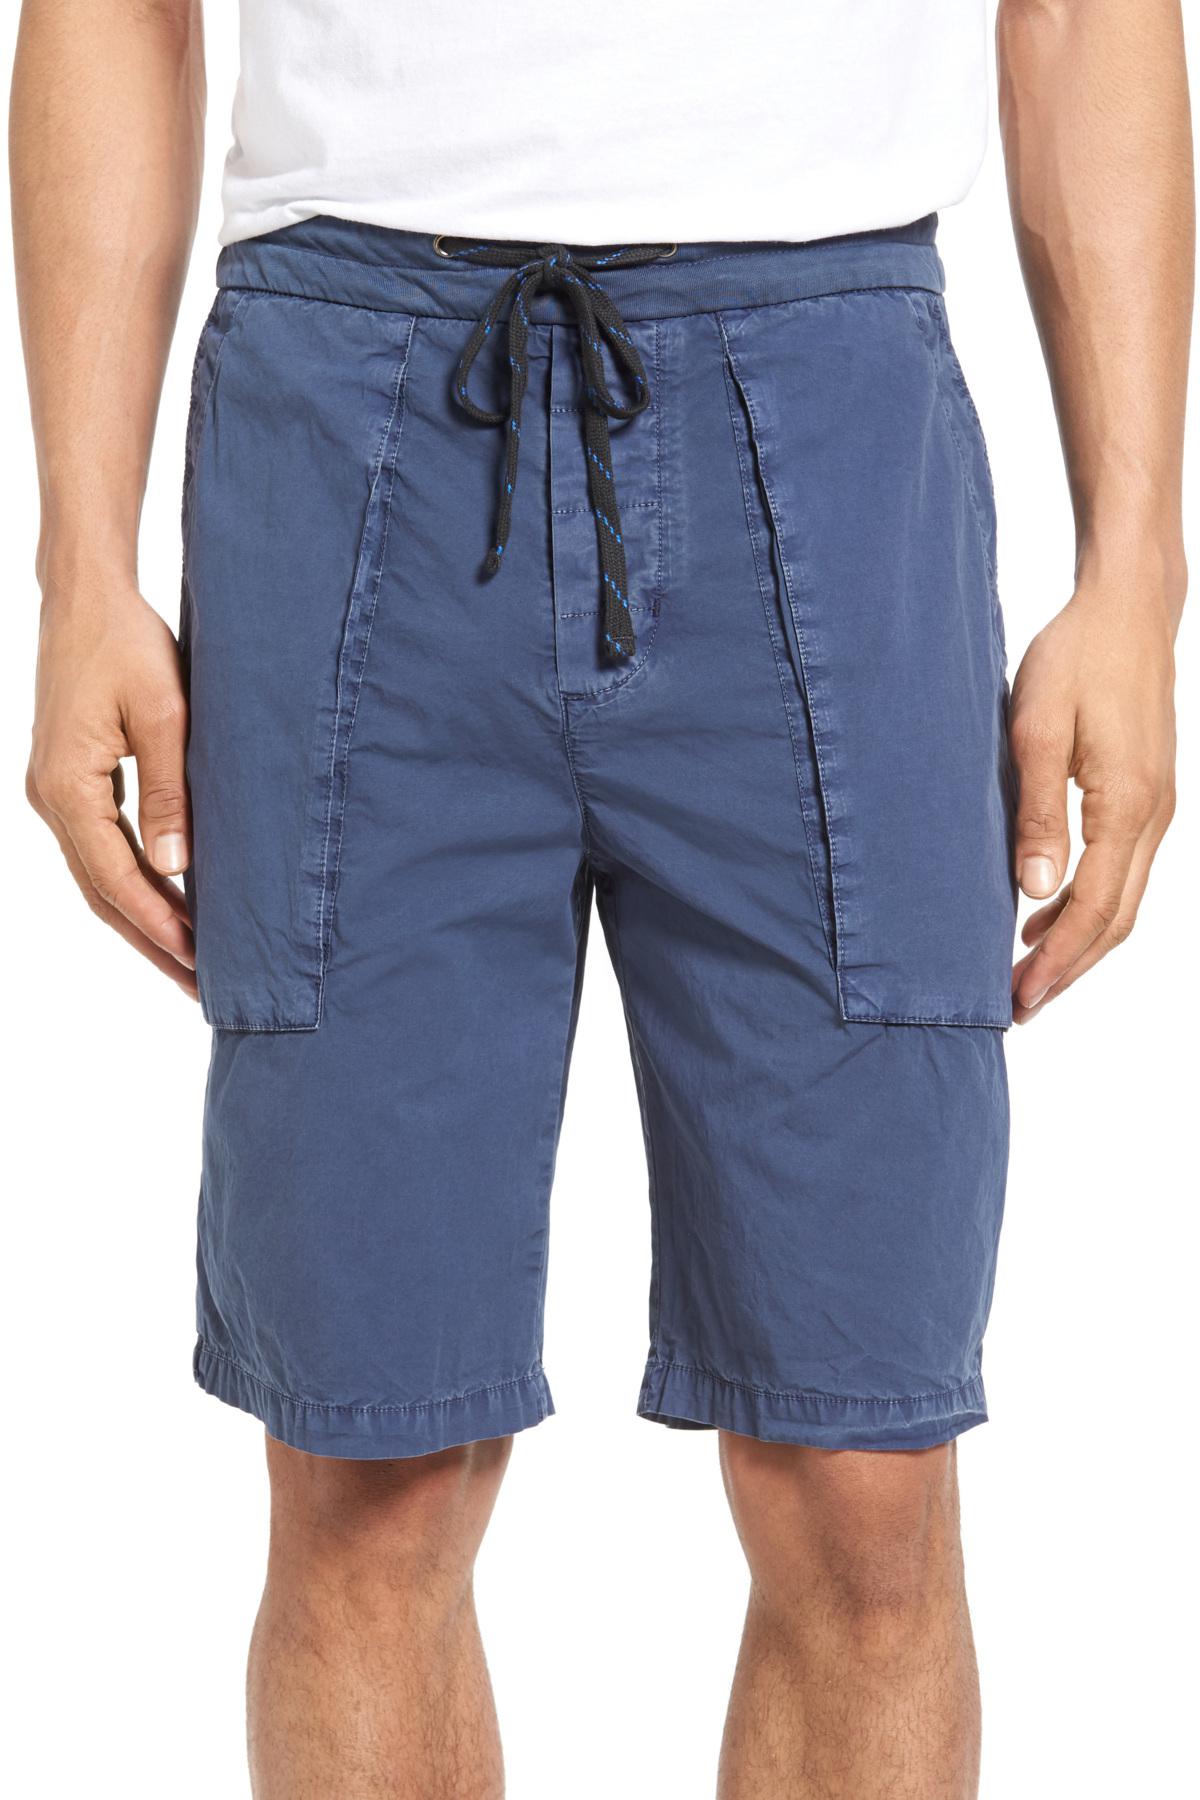 Lyst - James Perse Patch Pocket Shorts in Blue for Men